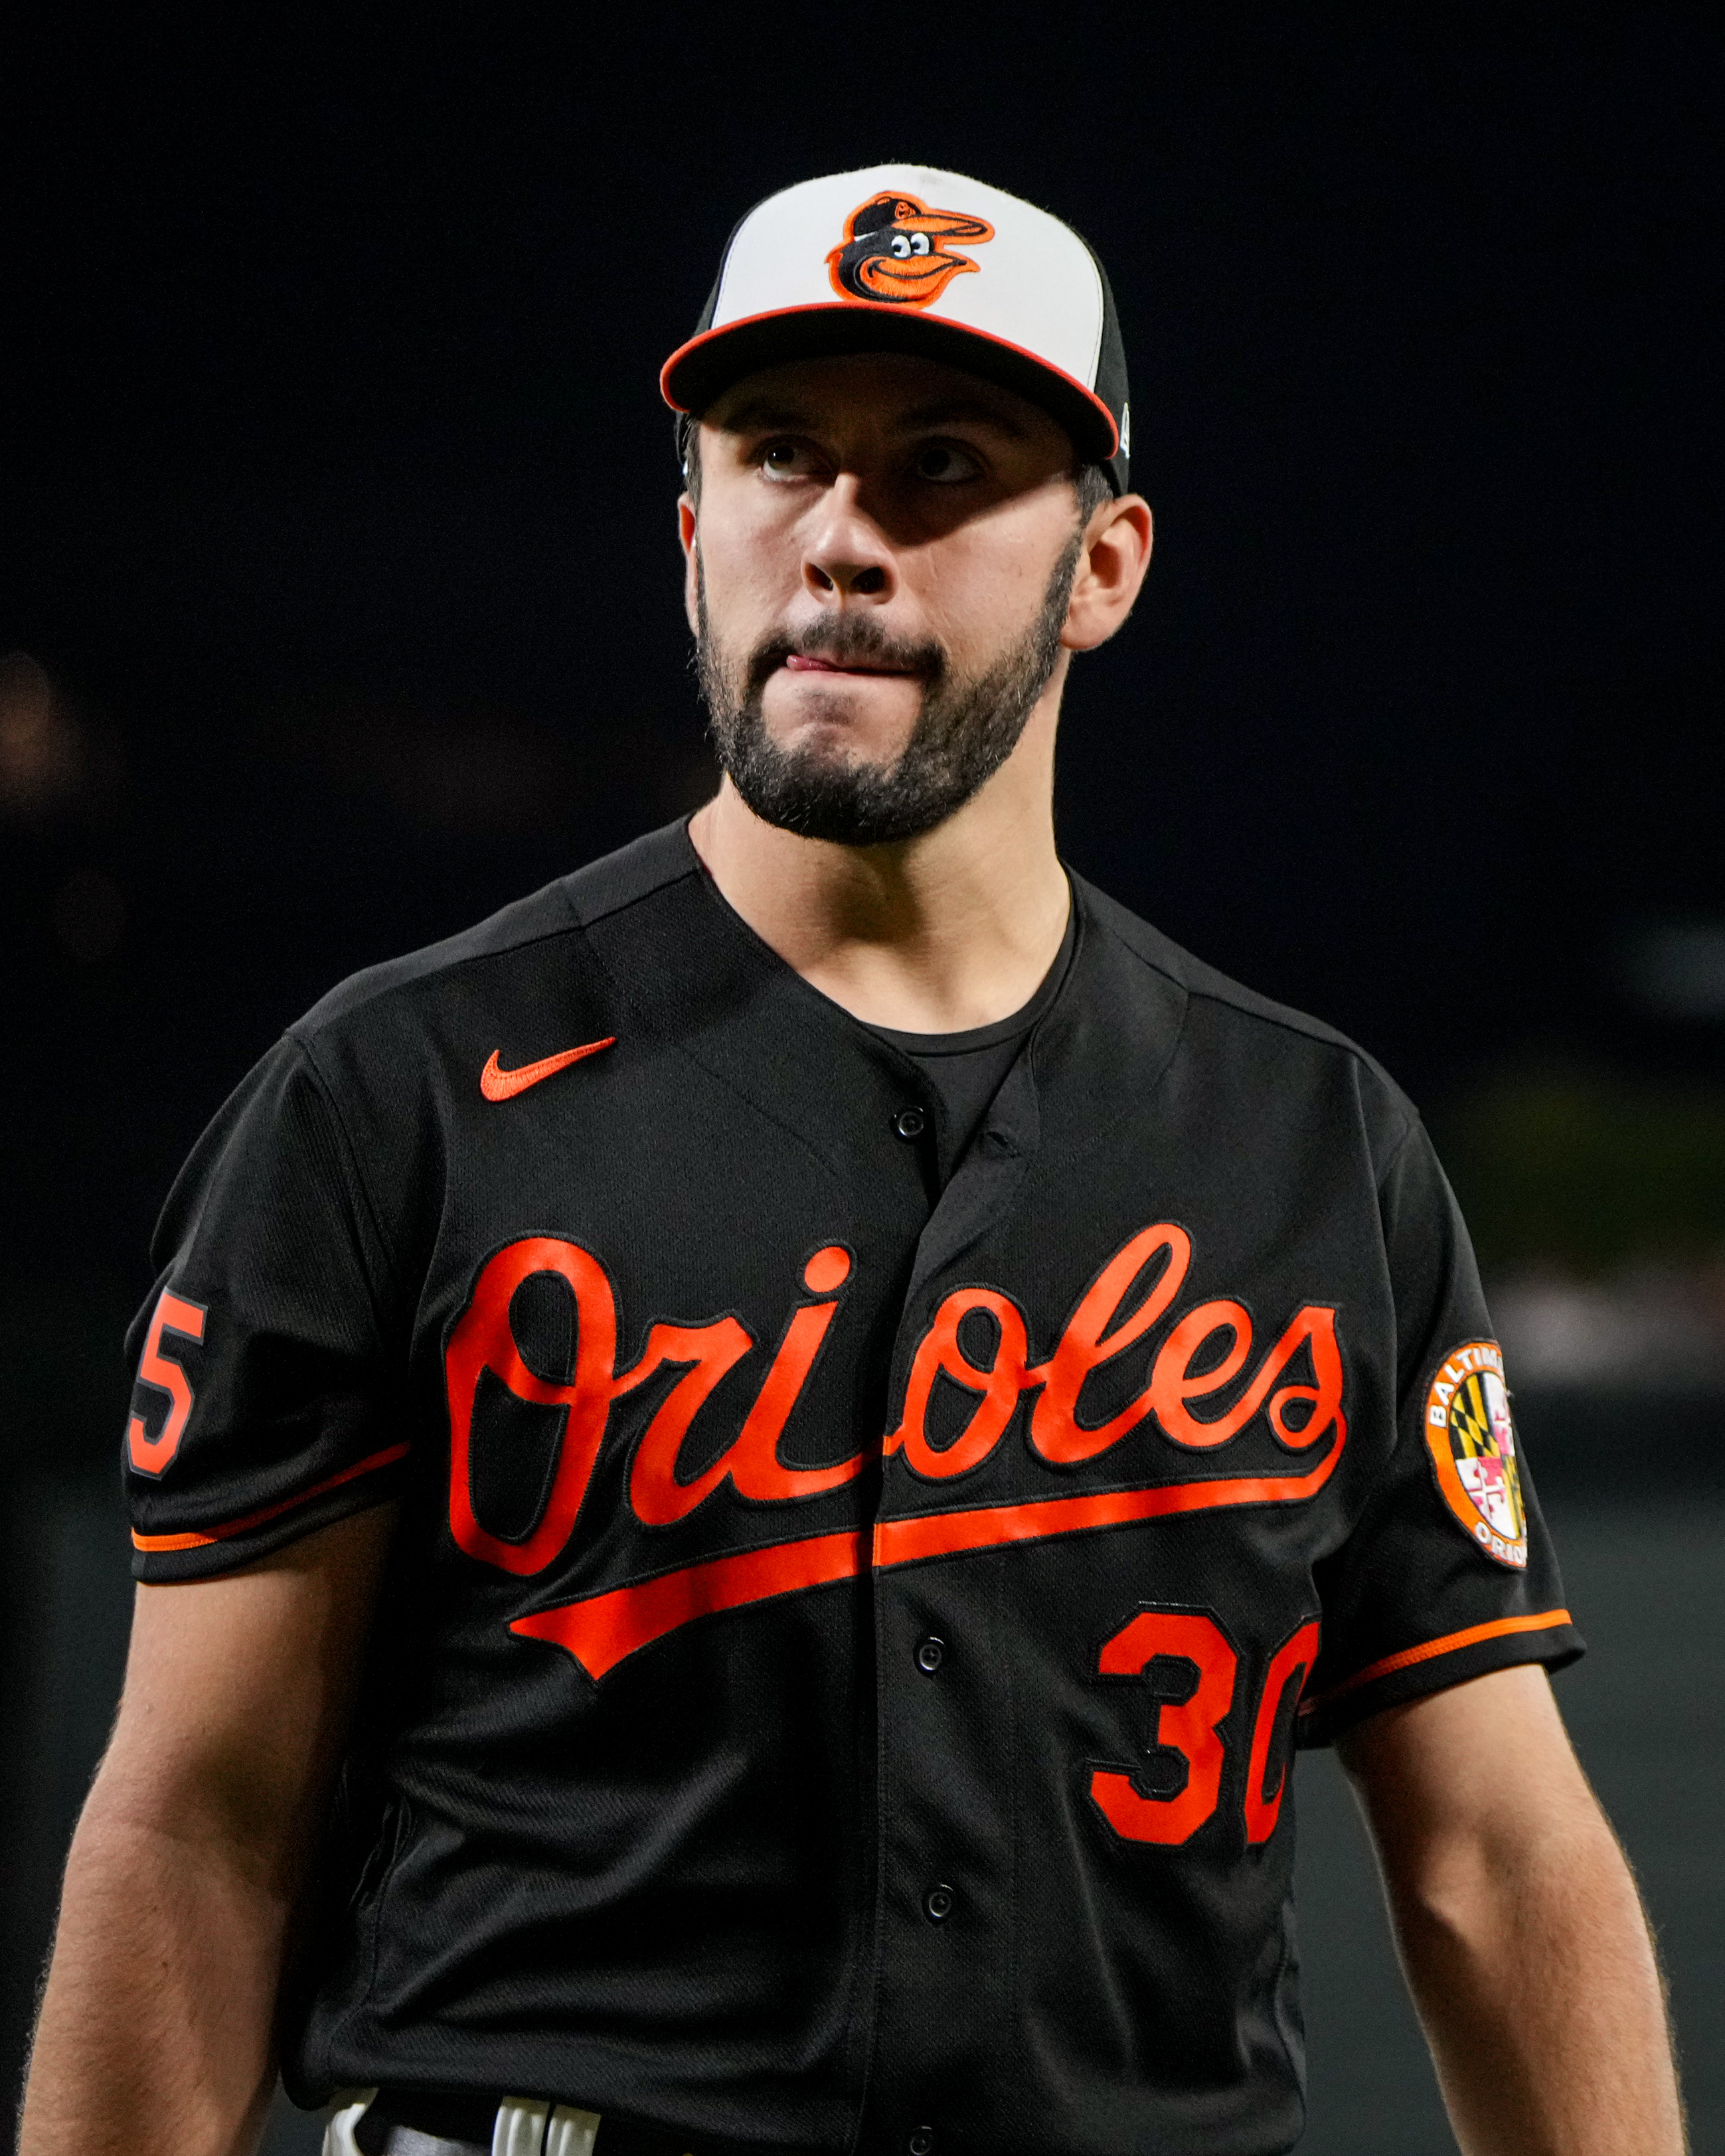 Baltimore Orioles: Huge Moments Highlight O's Win in Sarasota